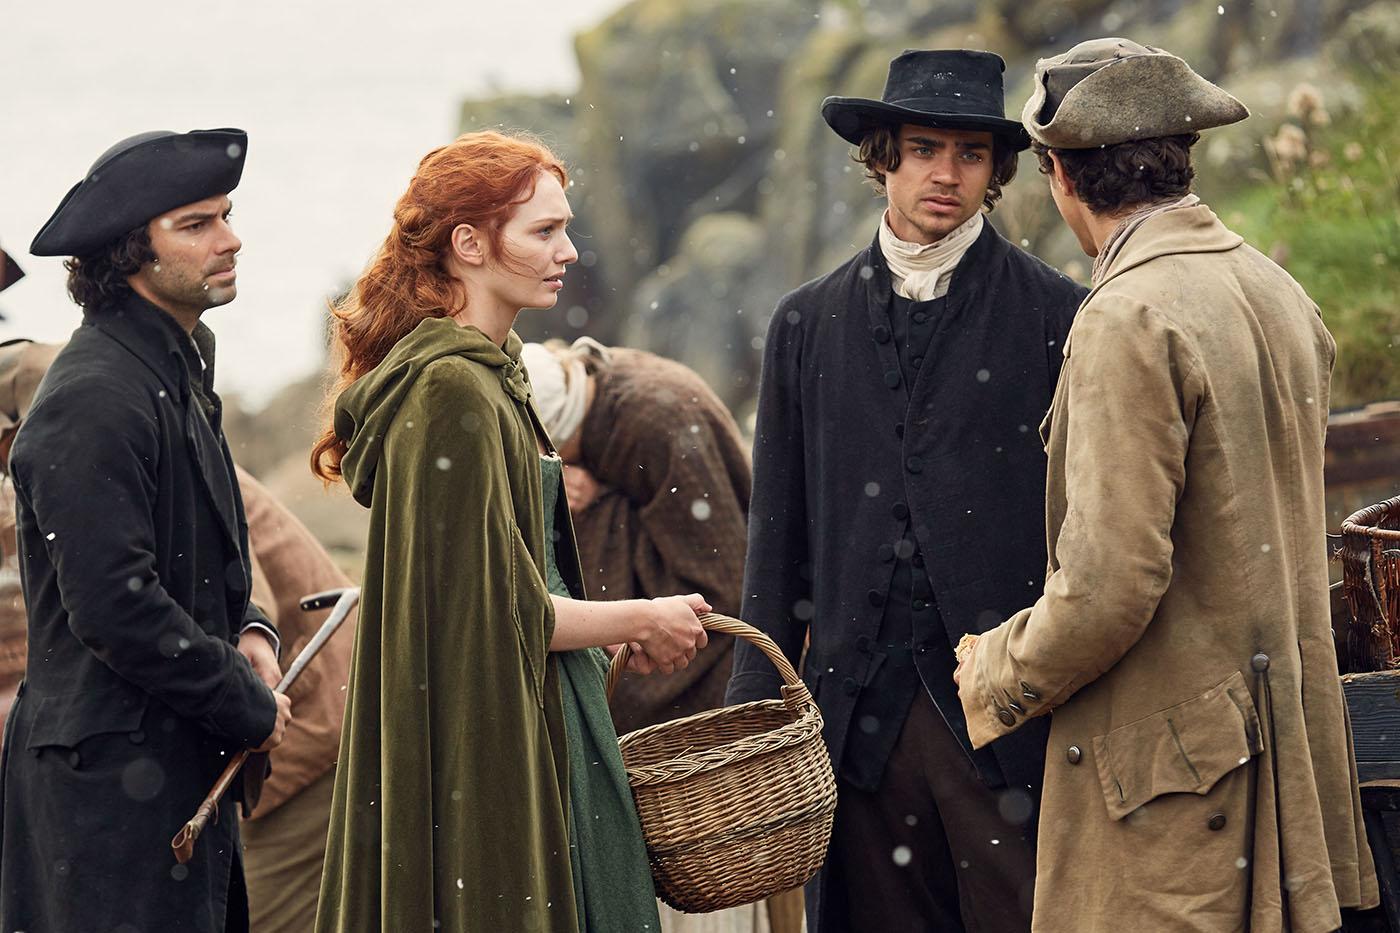 Poldark. Photo: Mammoth Screen for BBC and MASTERPIECE